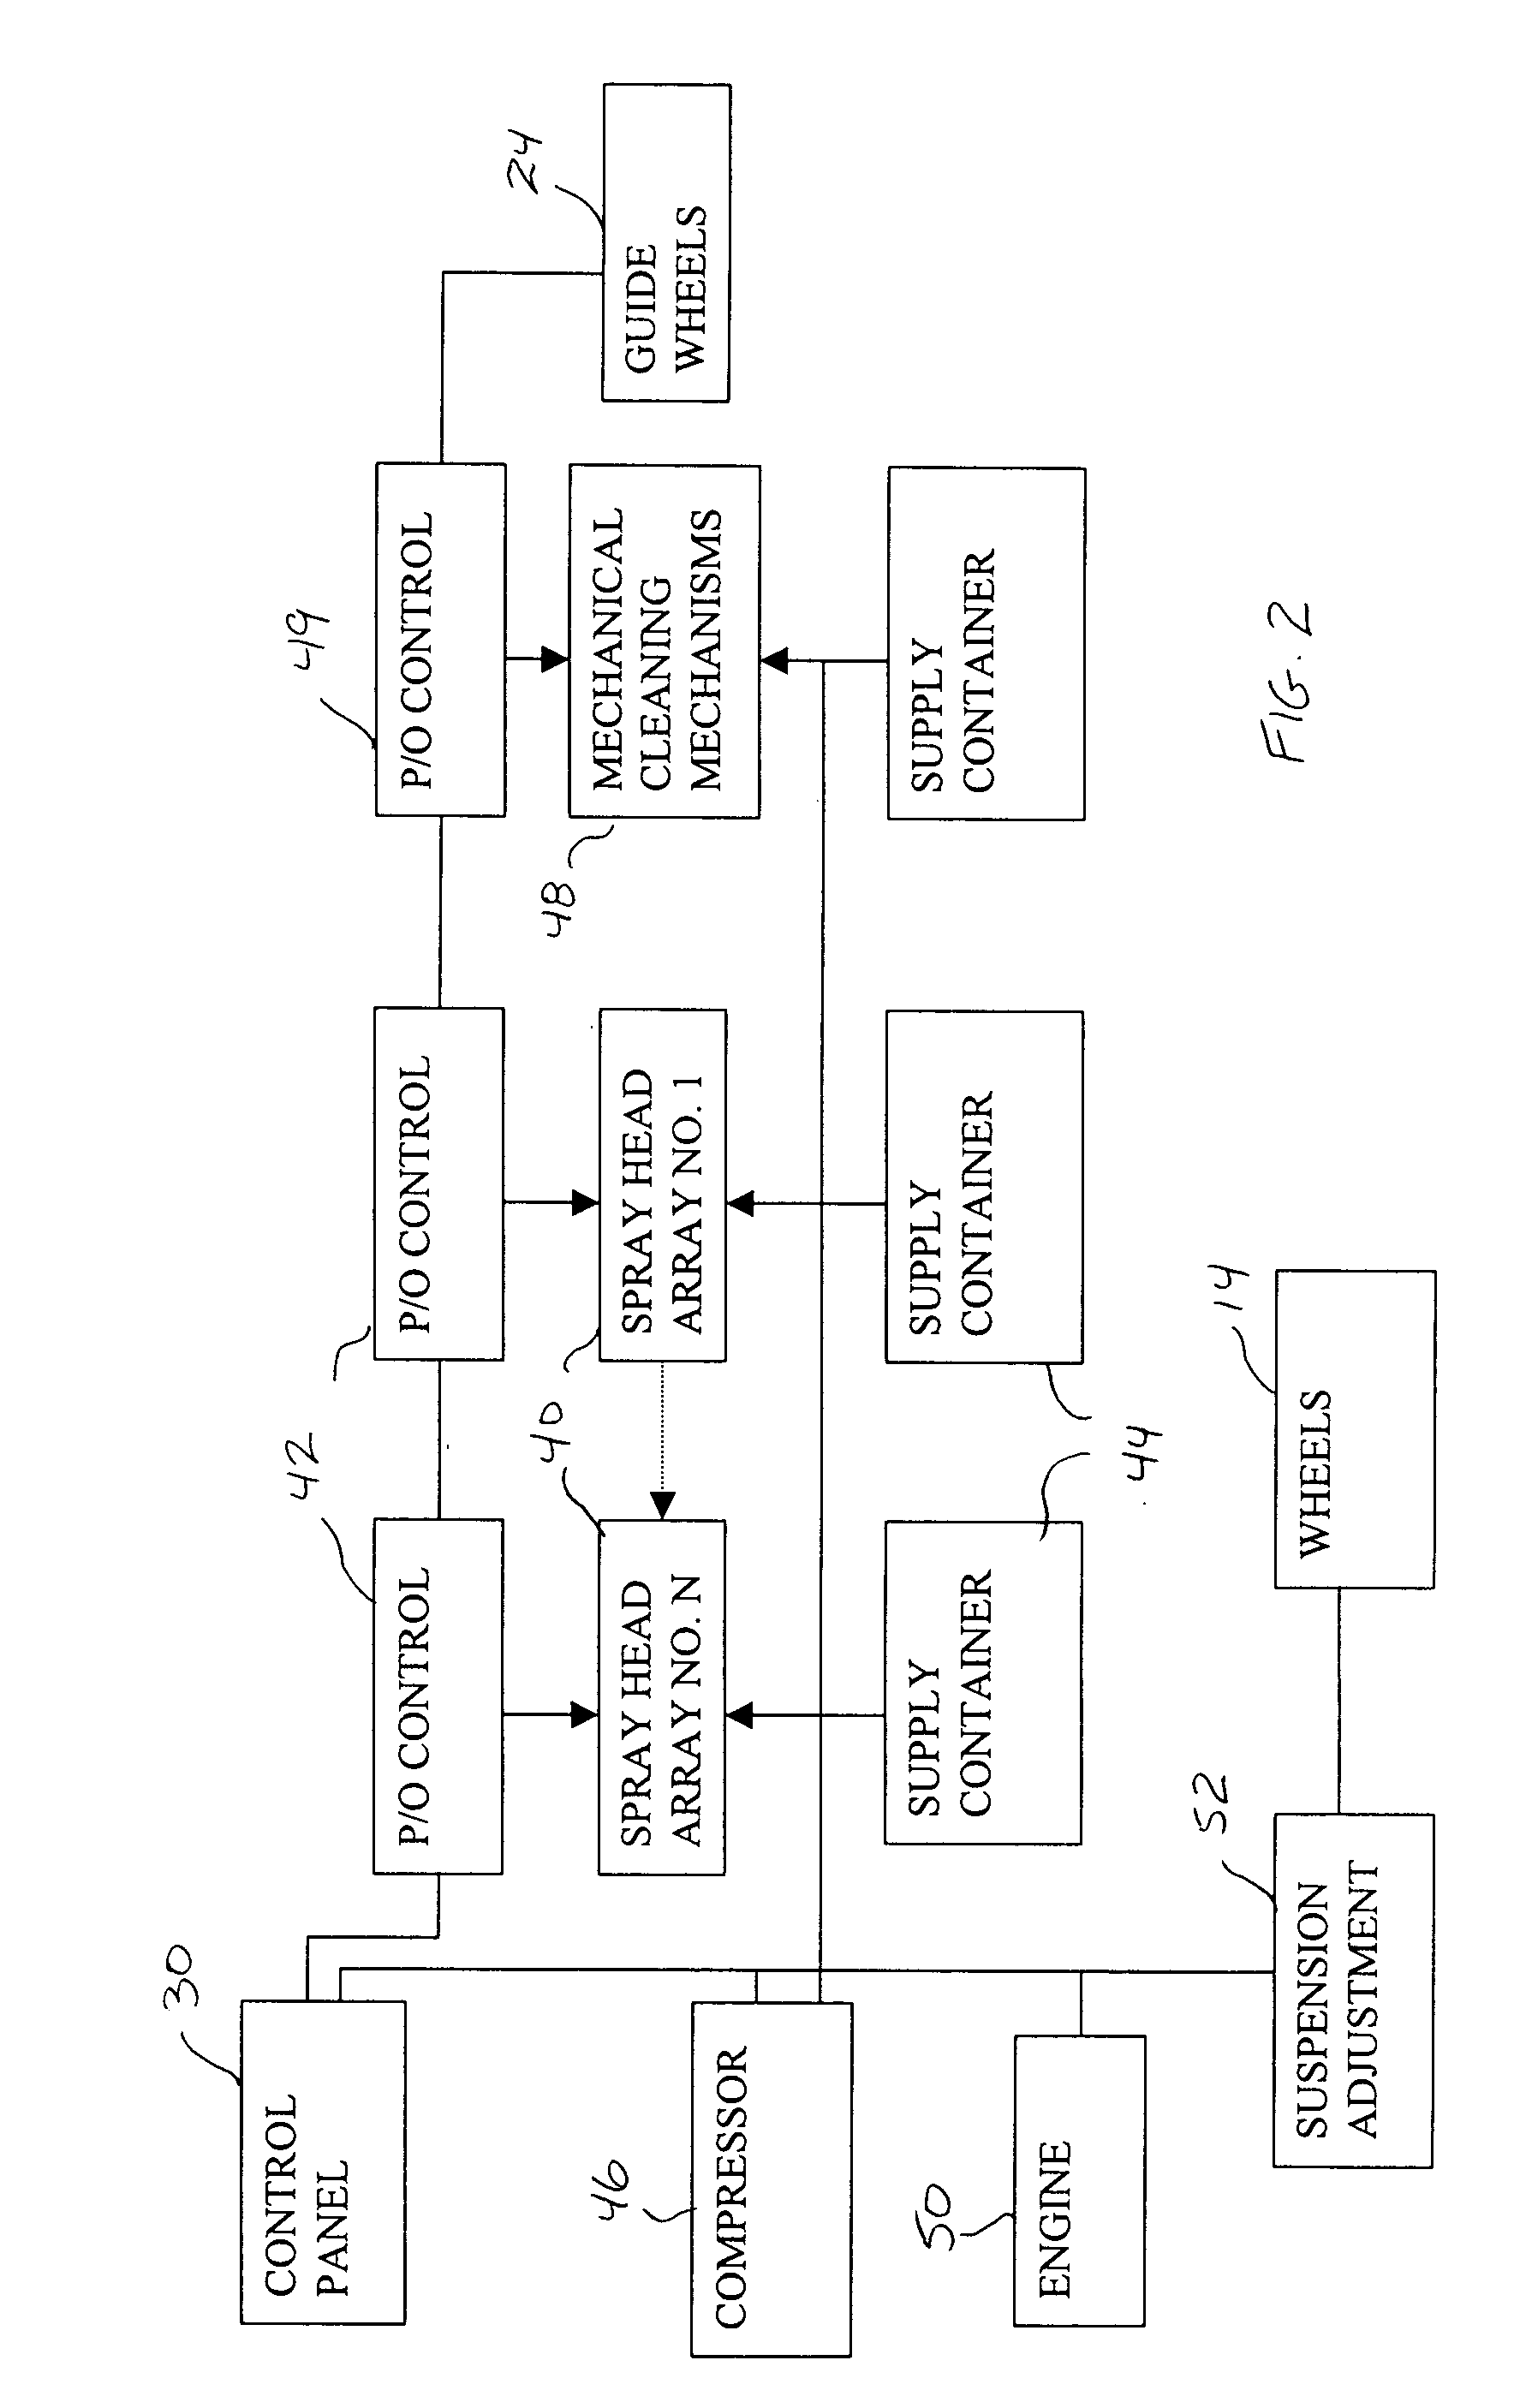 Apparatus and method for cleaning, painting and/or treating traffic barriers